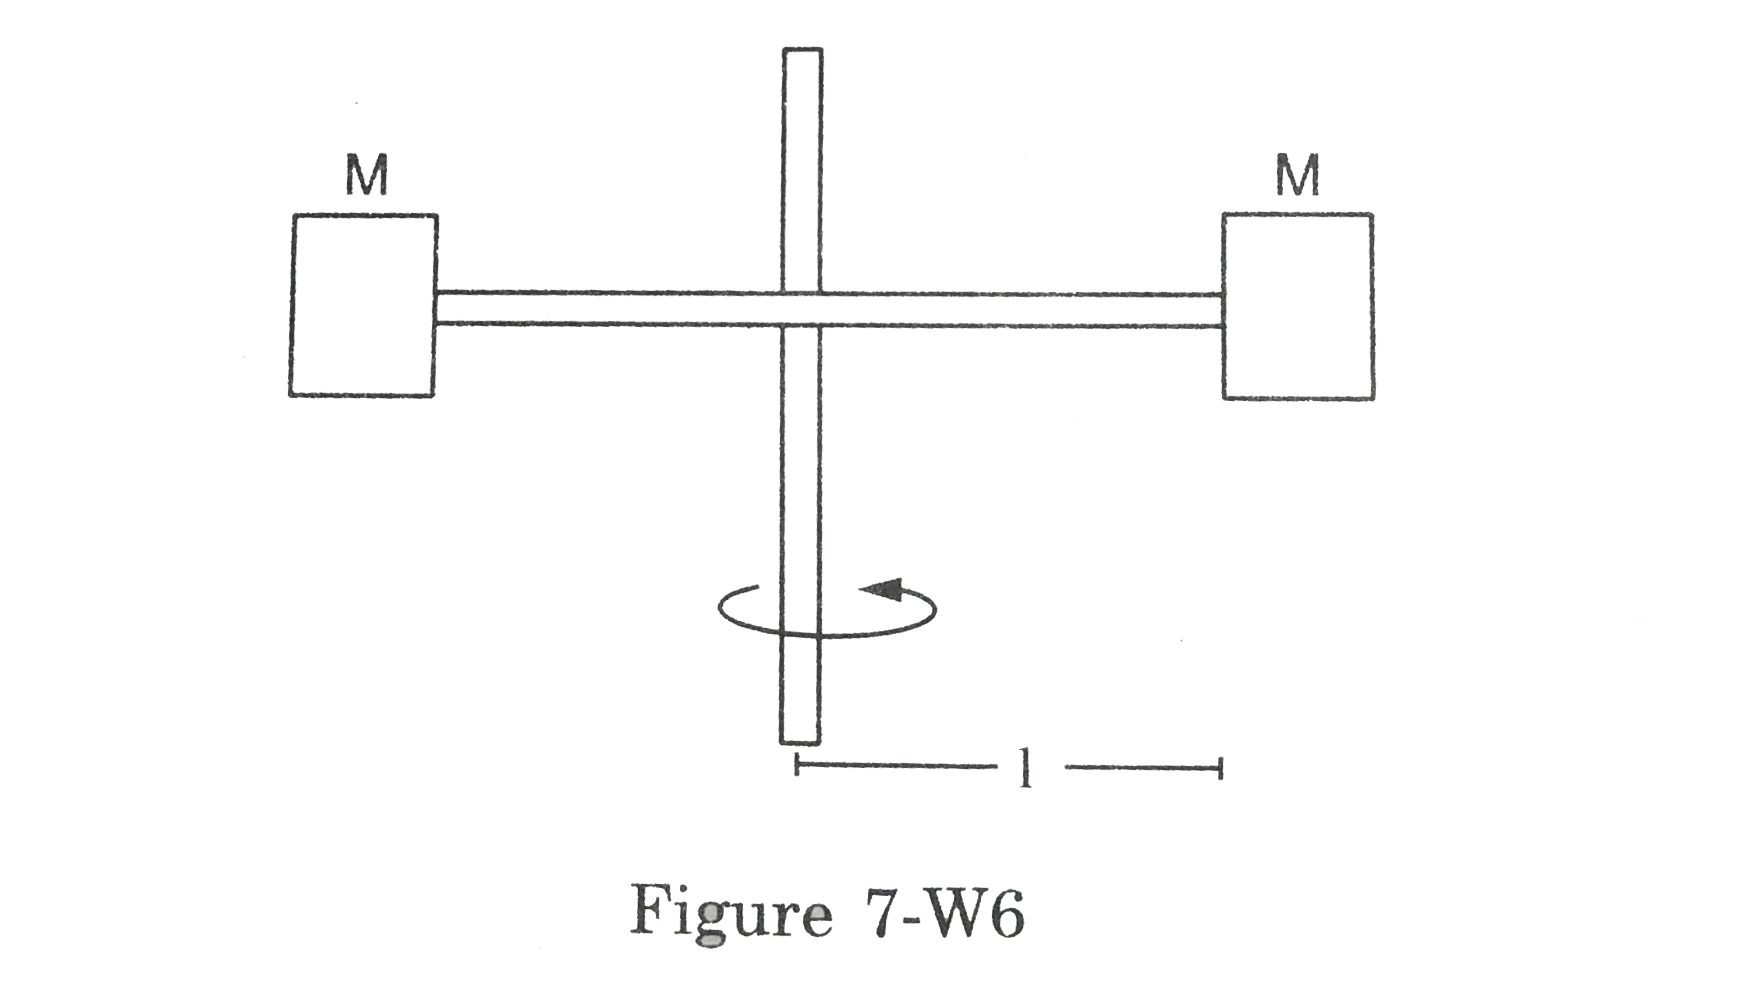 Two blocks each of mass M are connected to the ends of a light frame as shown in figure. The frame si rotated about the vertical line of symmetry. The rod breaks if the tension in it exceeds T0. Find the maximum frequency with which the frame may be rotted without breaking the rod.